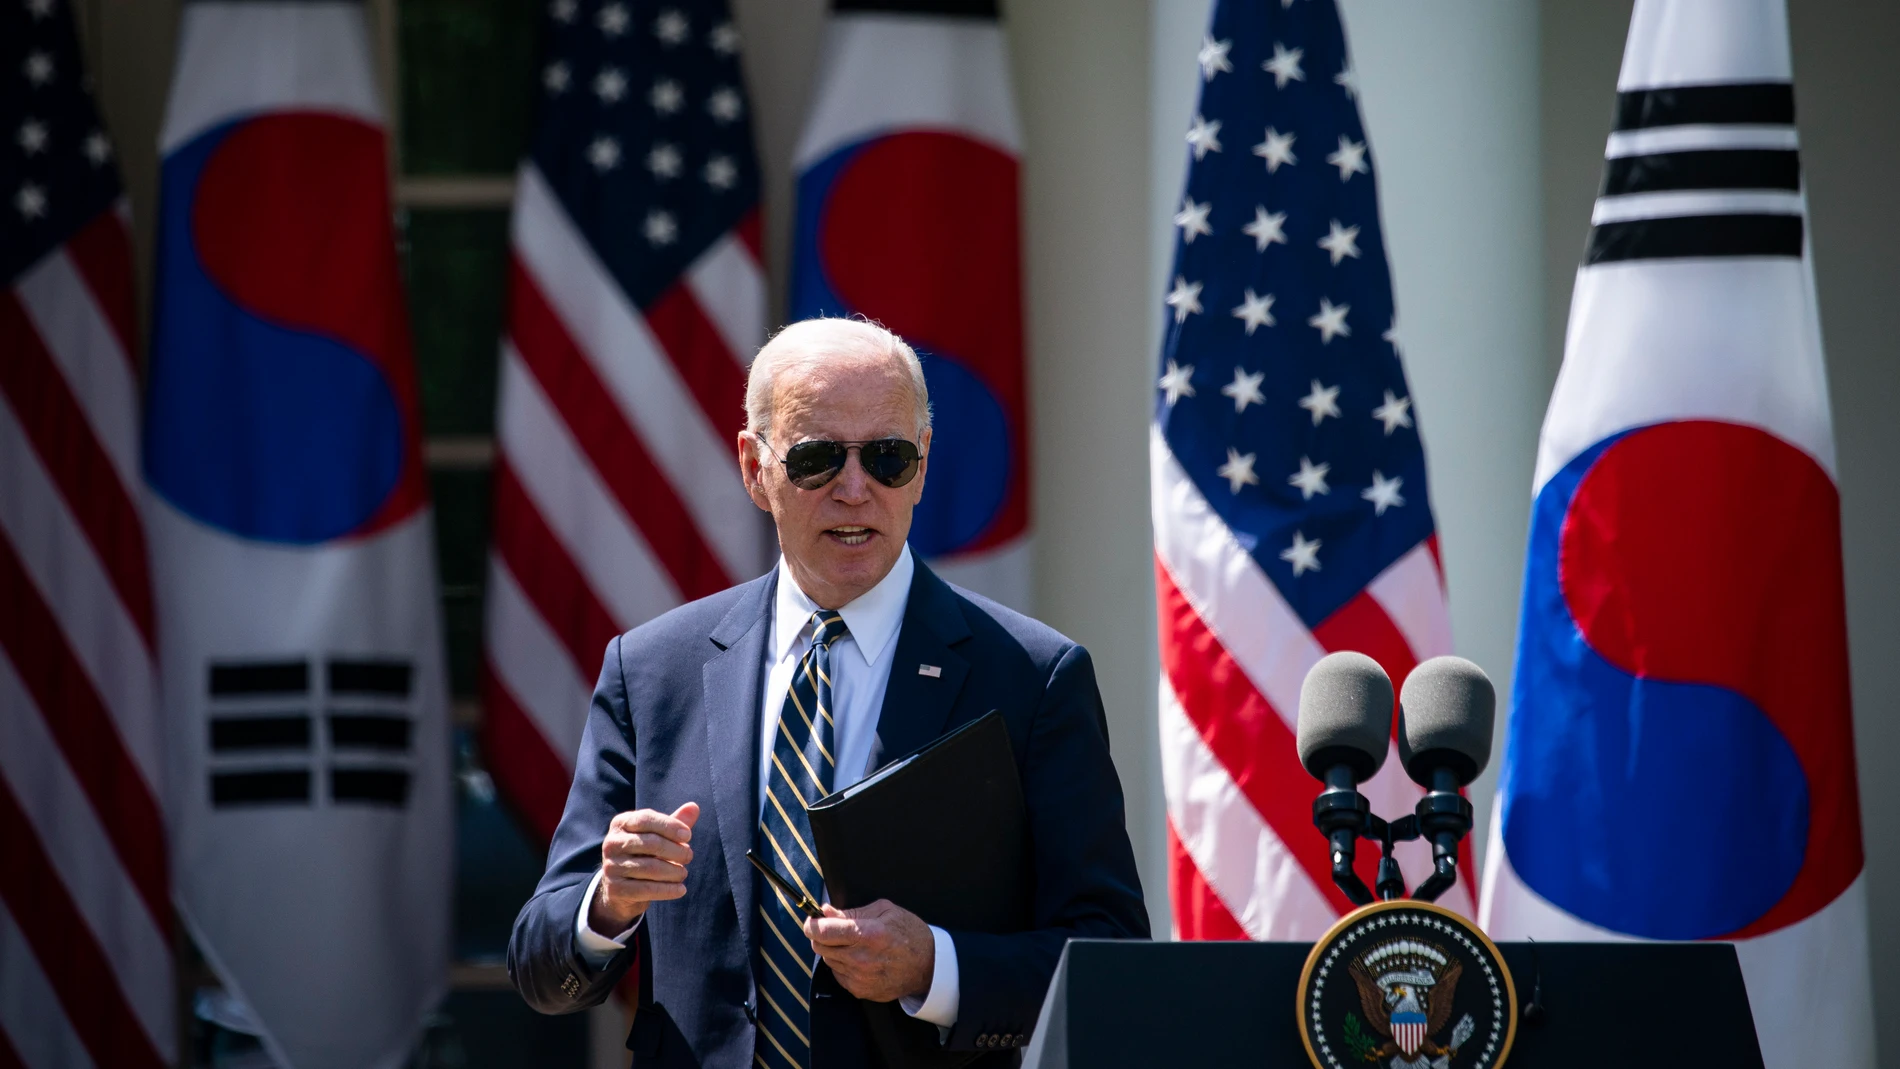 Washington (United States), 26/04/2023.- President Joe Biden speaks at a joint press conference with South Korean President Yoon Suk Yeol (not pictured) in the Rose Garden of the White House in Washington, DC, USA, 26 April 2023. Yoon is on the second day of a three-day visit to DC, which includes addressing a joint meeting of Congress and a tour of NASA's Goddard Space Flight Center. (Corea del Sur, Estados Unidos) EFE/EPA/AL DRAGO / POOL 